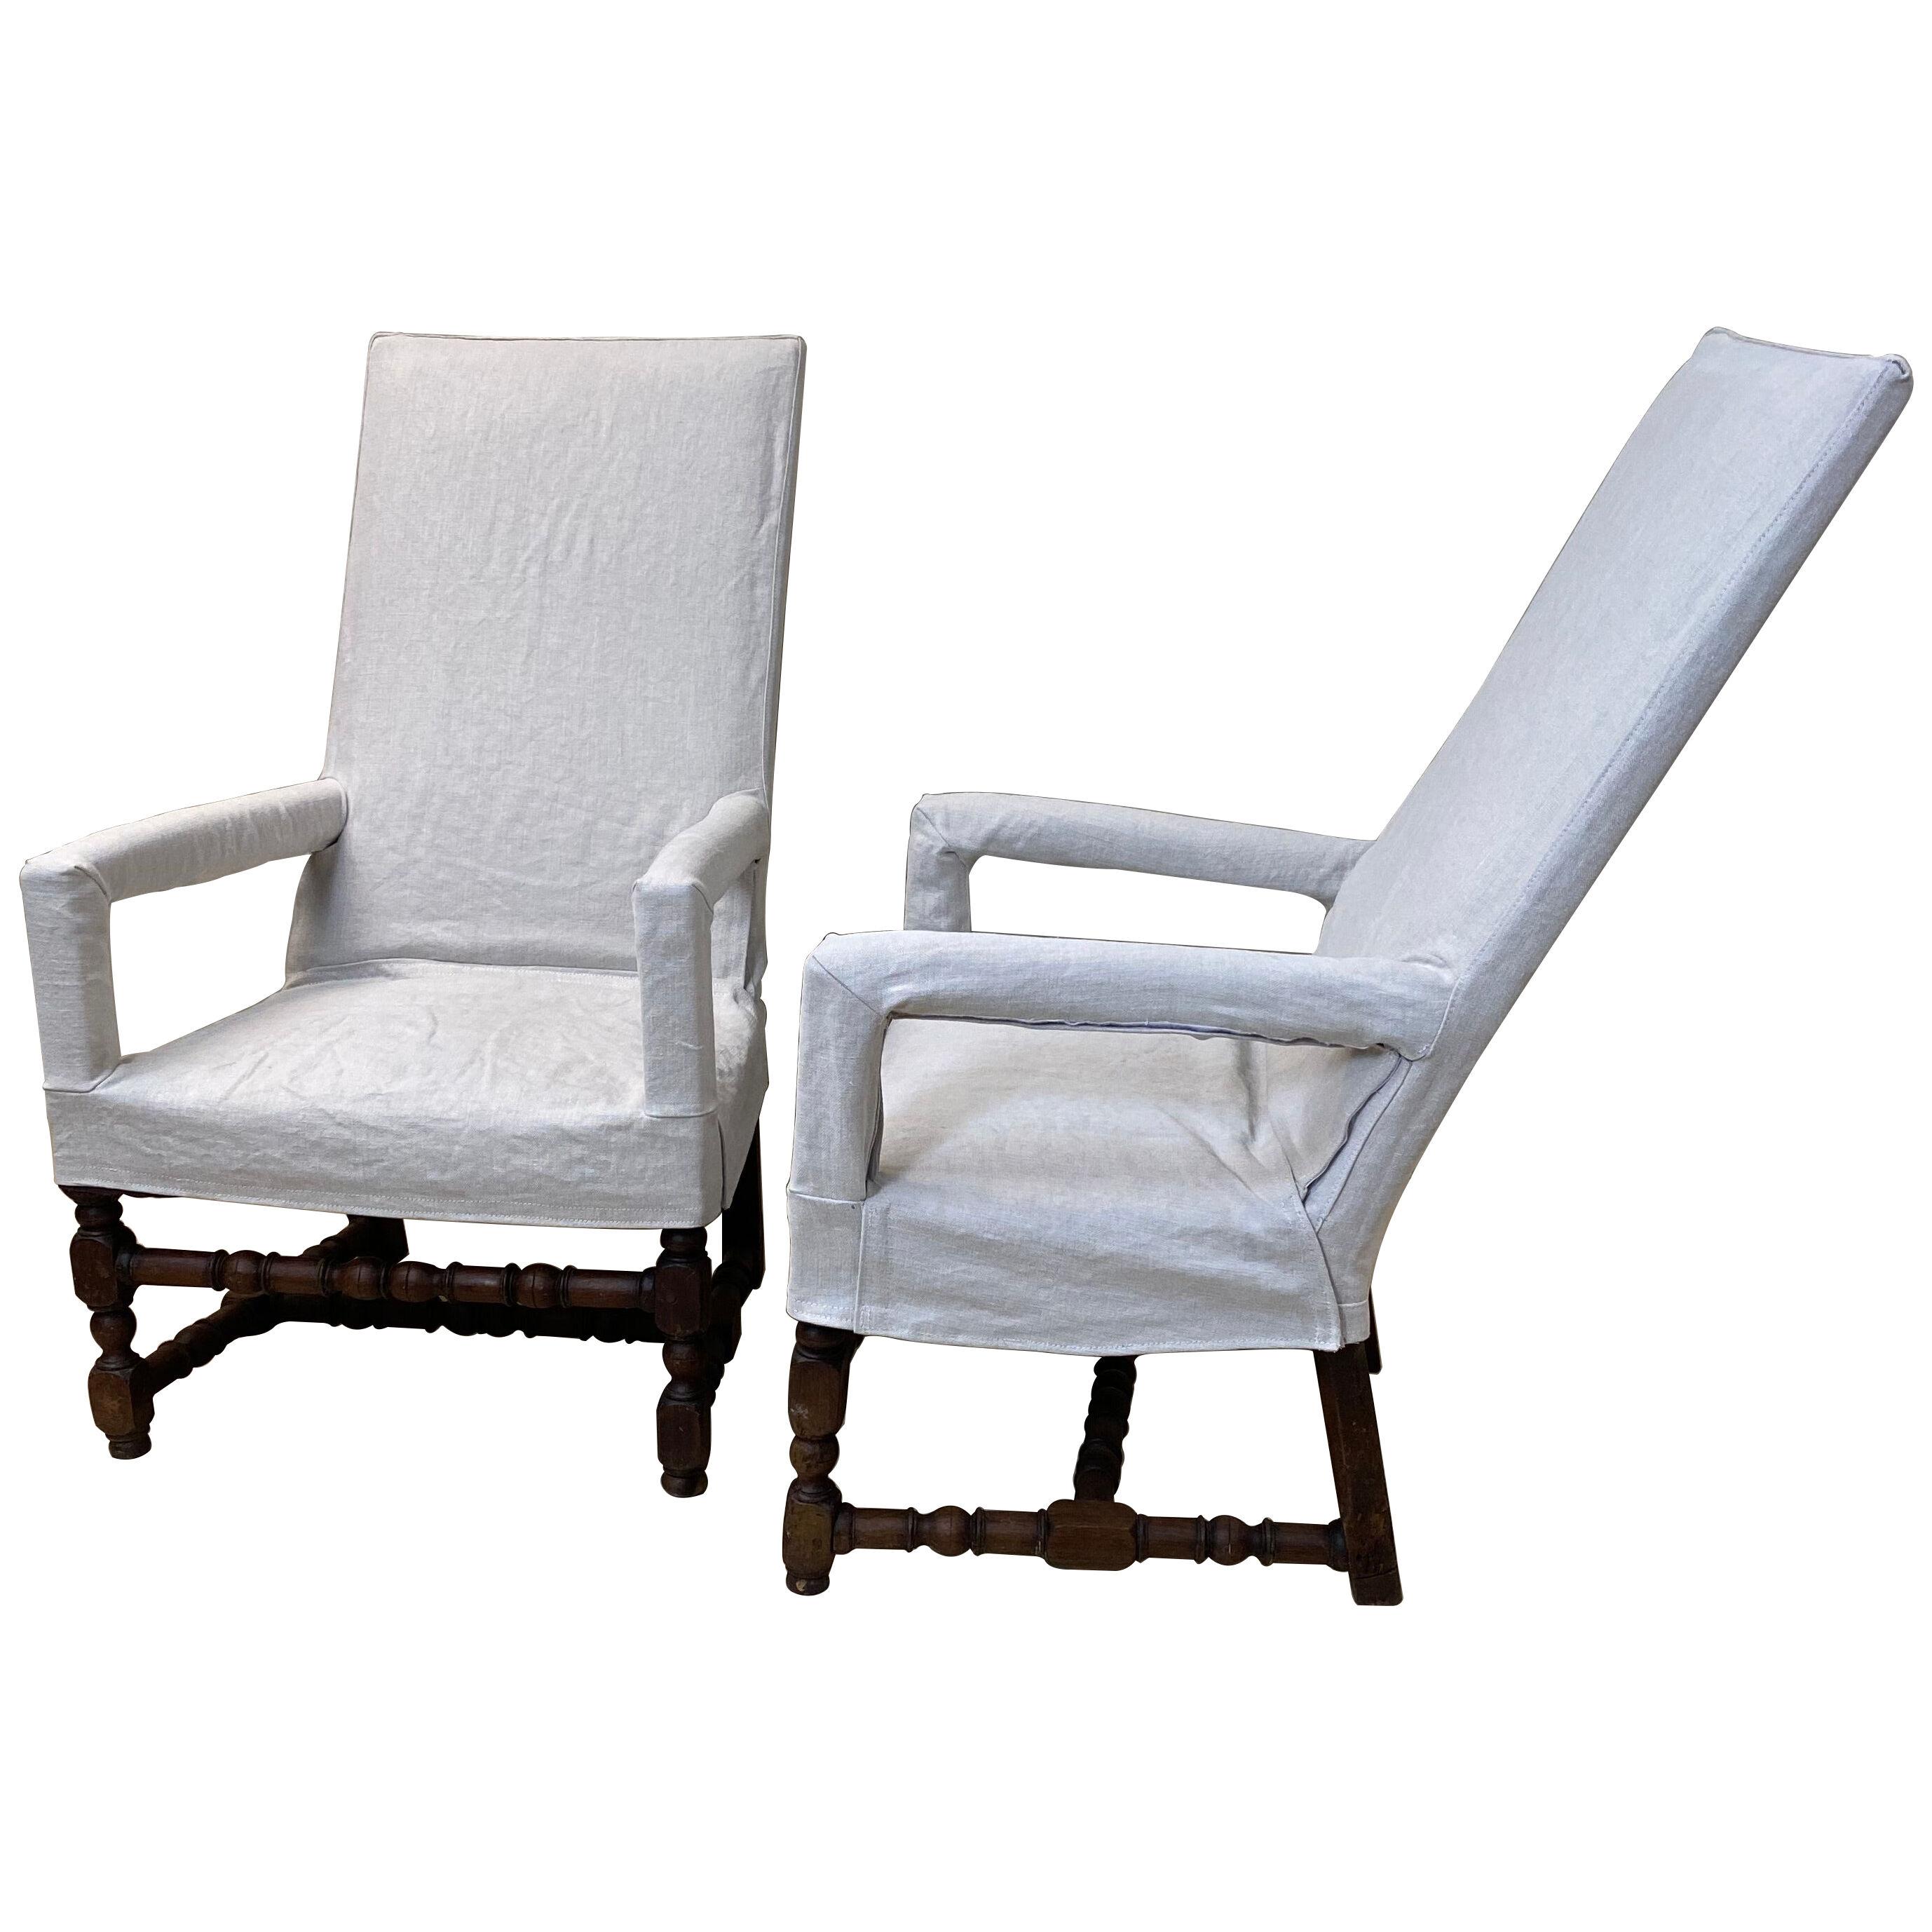 Pair of Arm French Chairs,1890